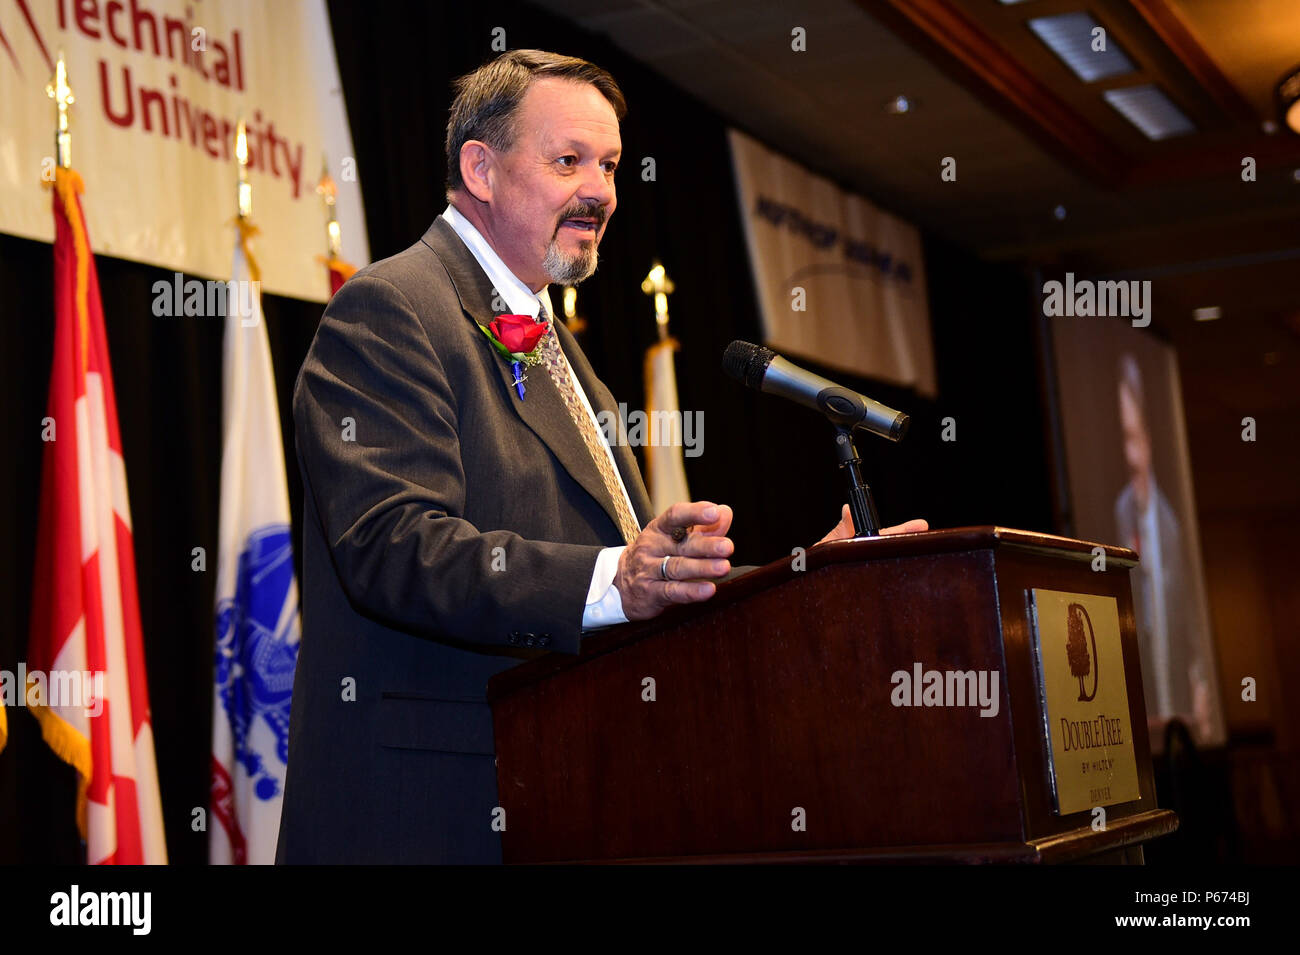 Rick Crandell, master of ceremonies, speaks May 13, 2016, during the Armed Forces Recognition Luncheon at the Doubletree Stapleton Hotel in Denver. The luncheon recognized outstanding Service members from all branches of service including active duty, guard and reserve components. (U.S. Air Force photo by Airman 1st Class Gabrielle Spradling/Released) Stock Photo